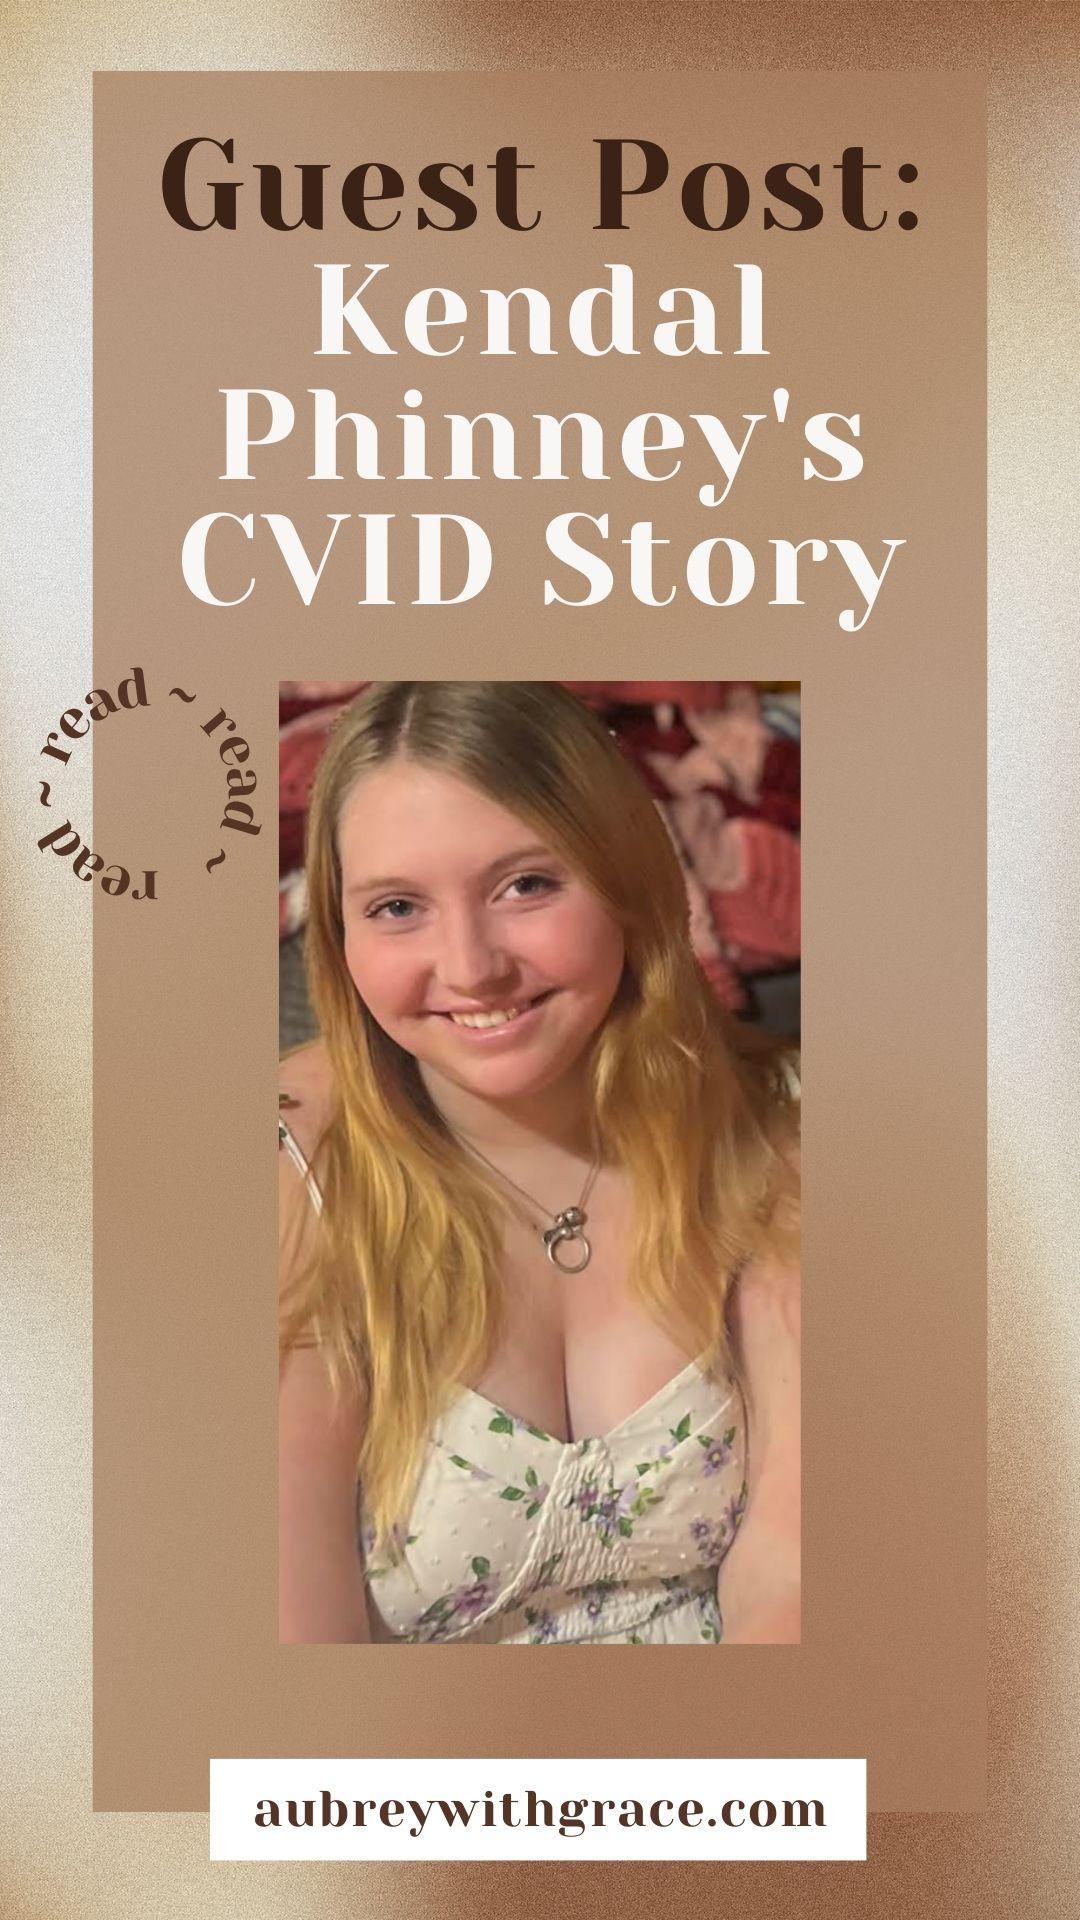 Guest Post: Kendal Phinney's CVID Story